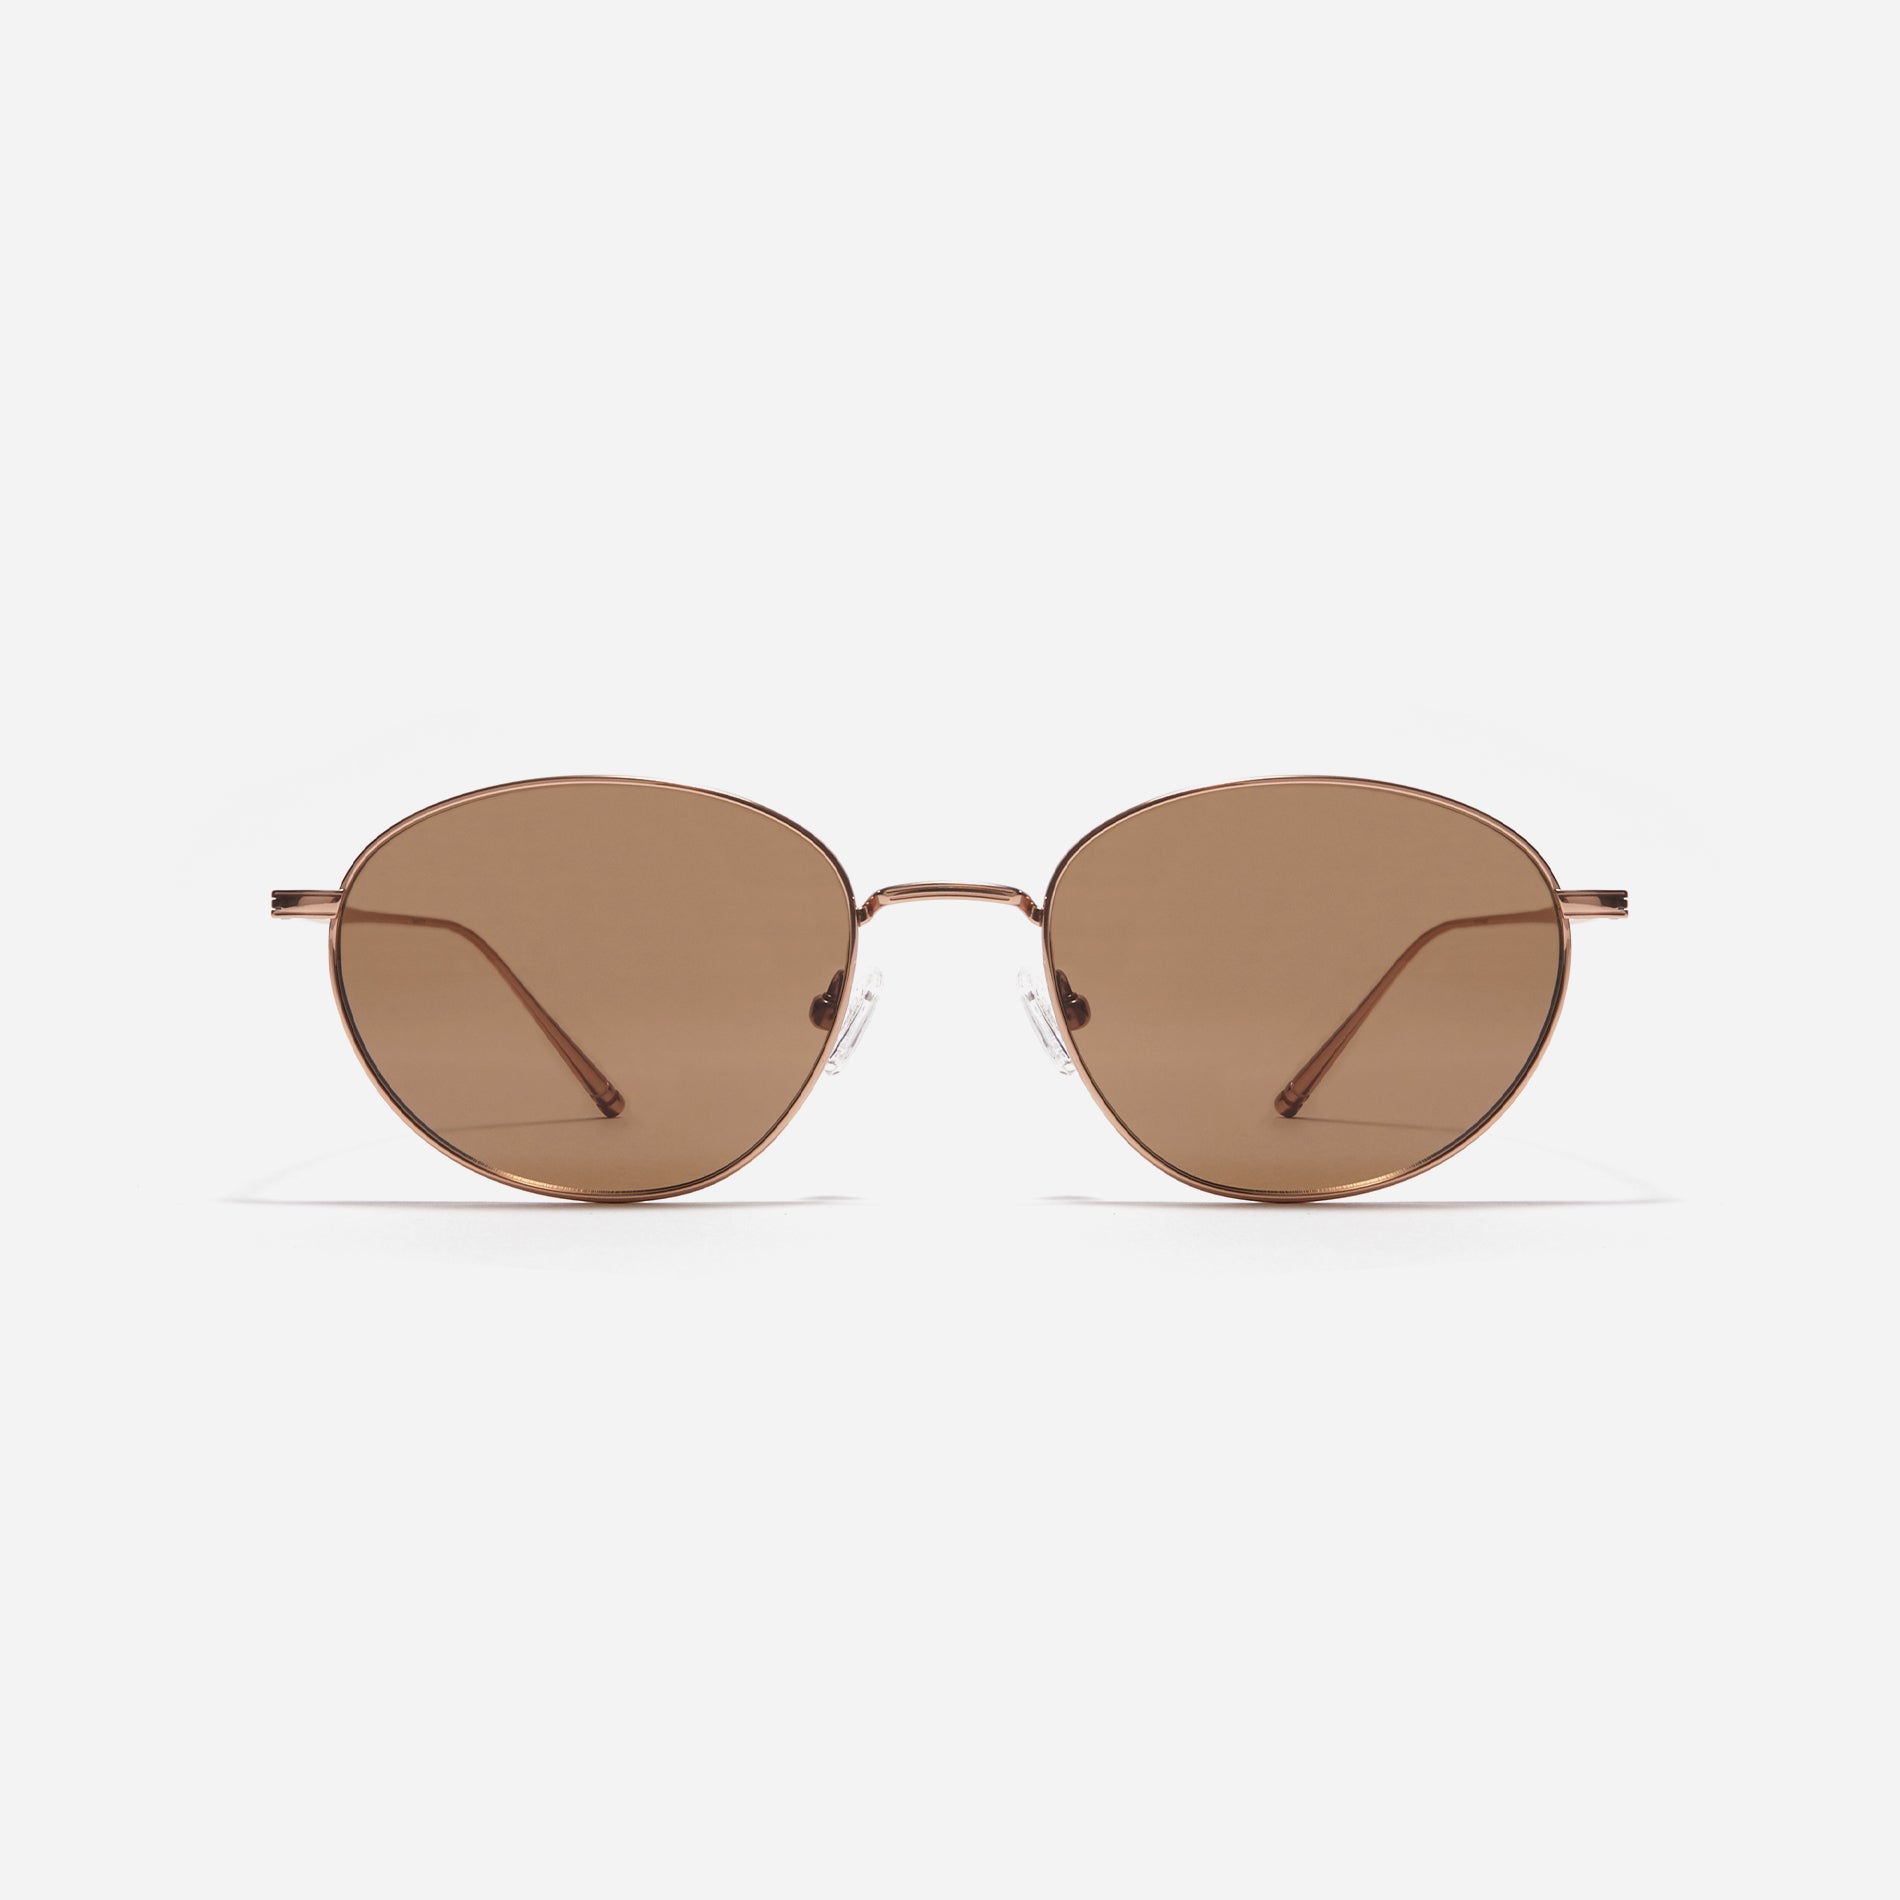 Idell sunglasses feature sleek metal frame with a narrow design. Crafted entirely from titanium, they guarantee a lightweight and comfortable fit. Available in color variations that naturally complement facial features, they provide a soft and versatile style for everyday wear.